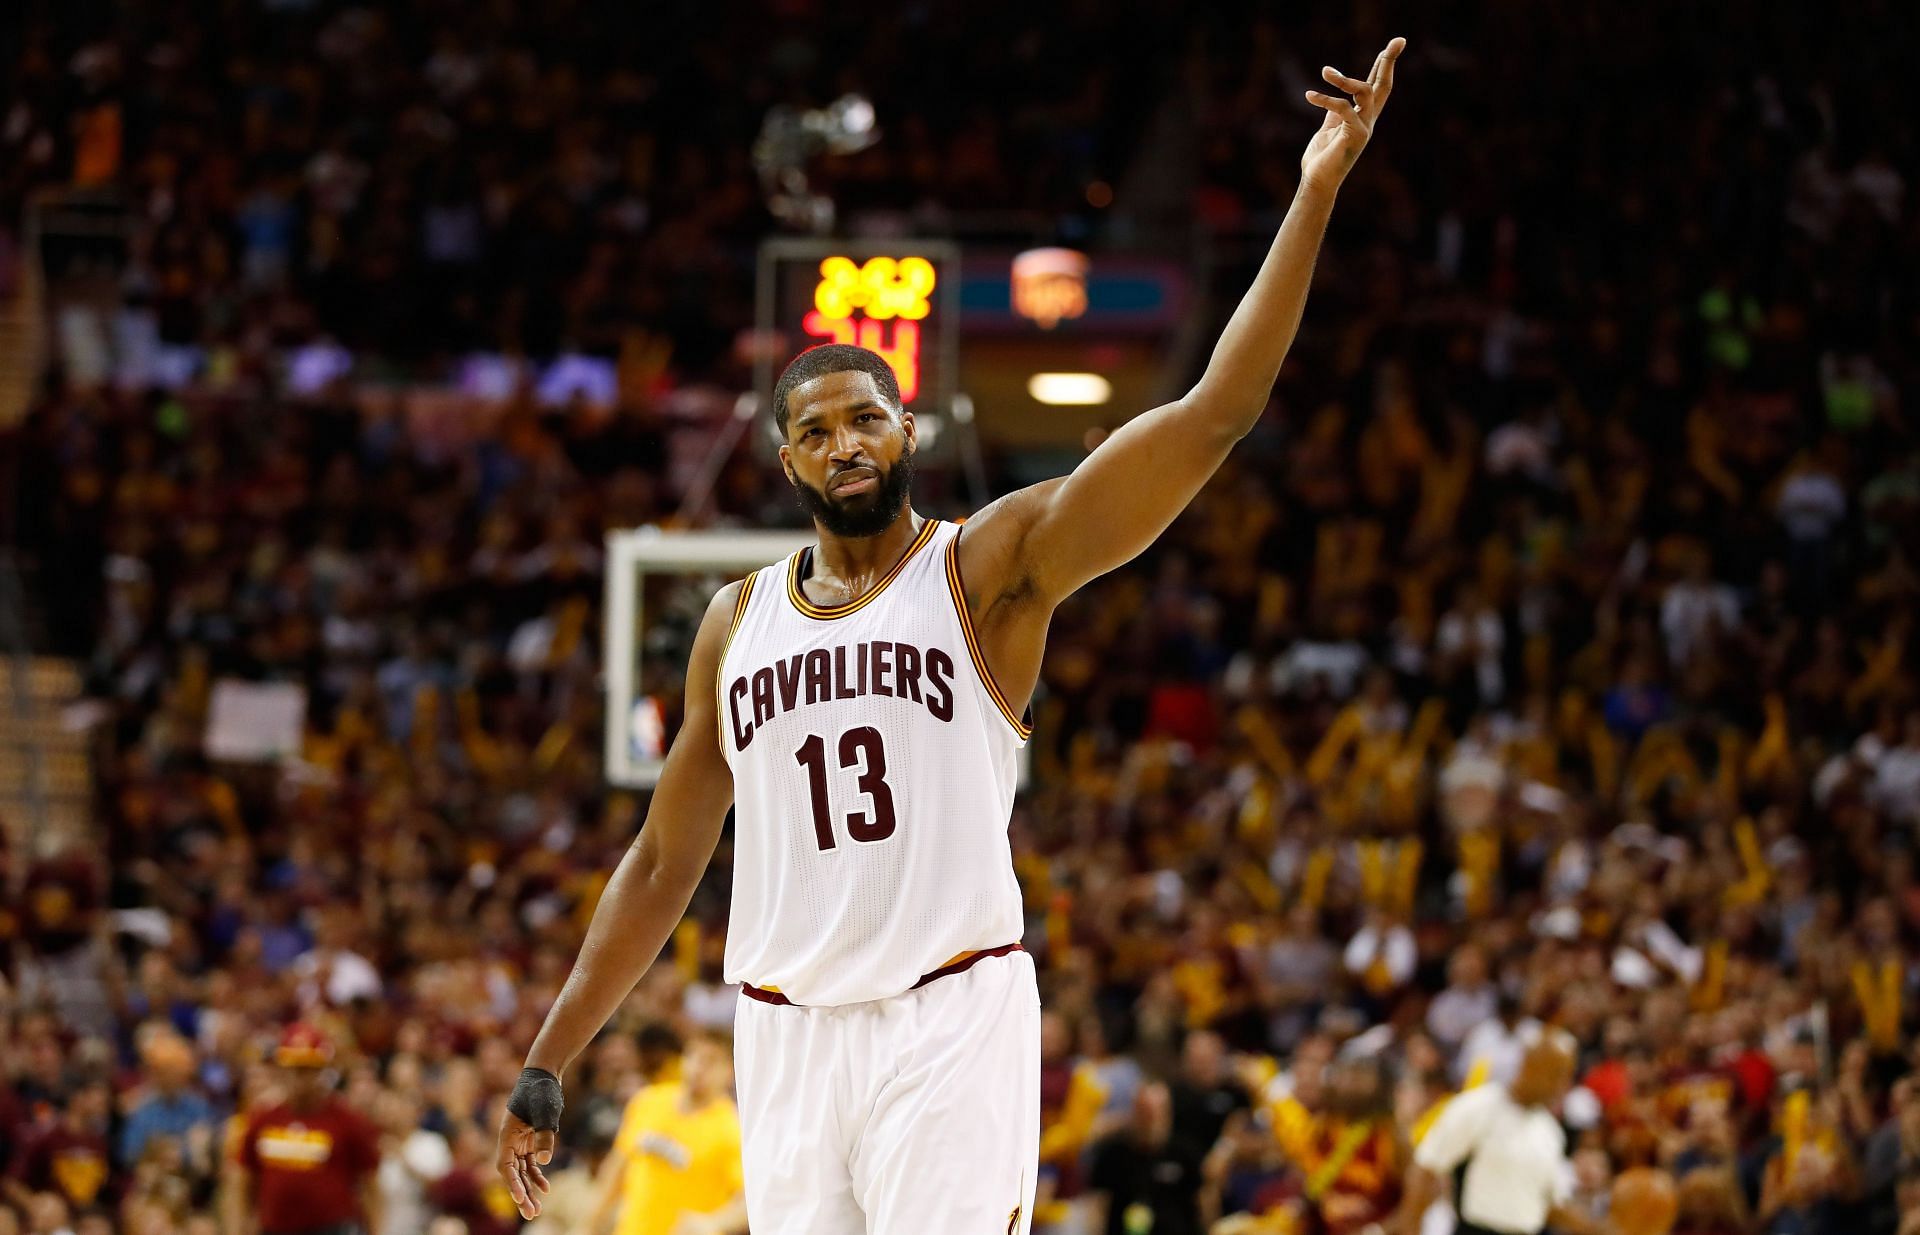 Tristan Thompson of the Cleveland Cavaliers during the 2017 NBA Finals